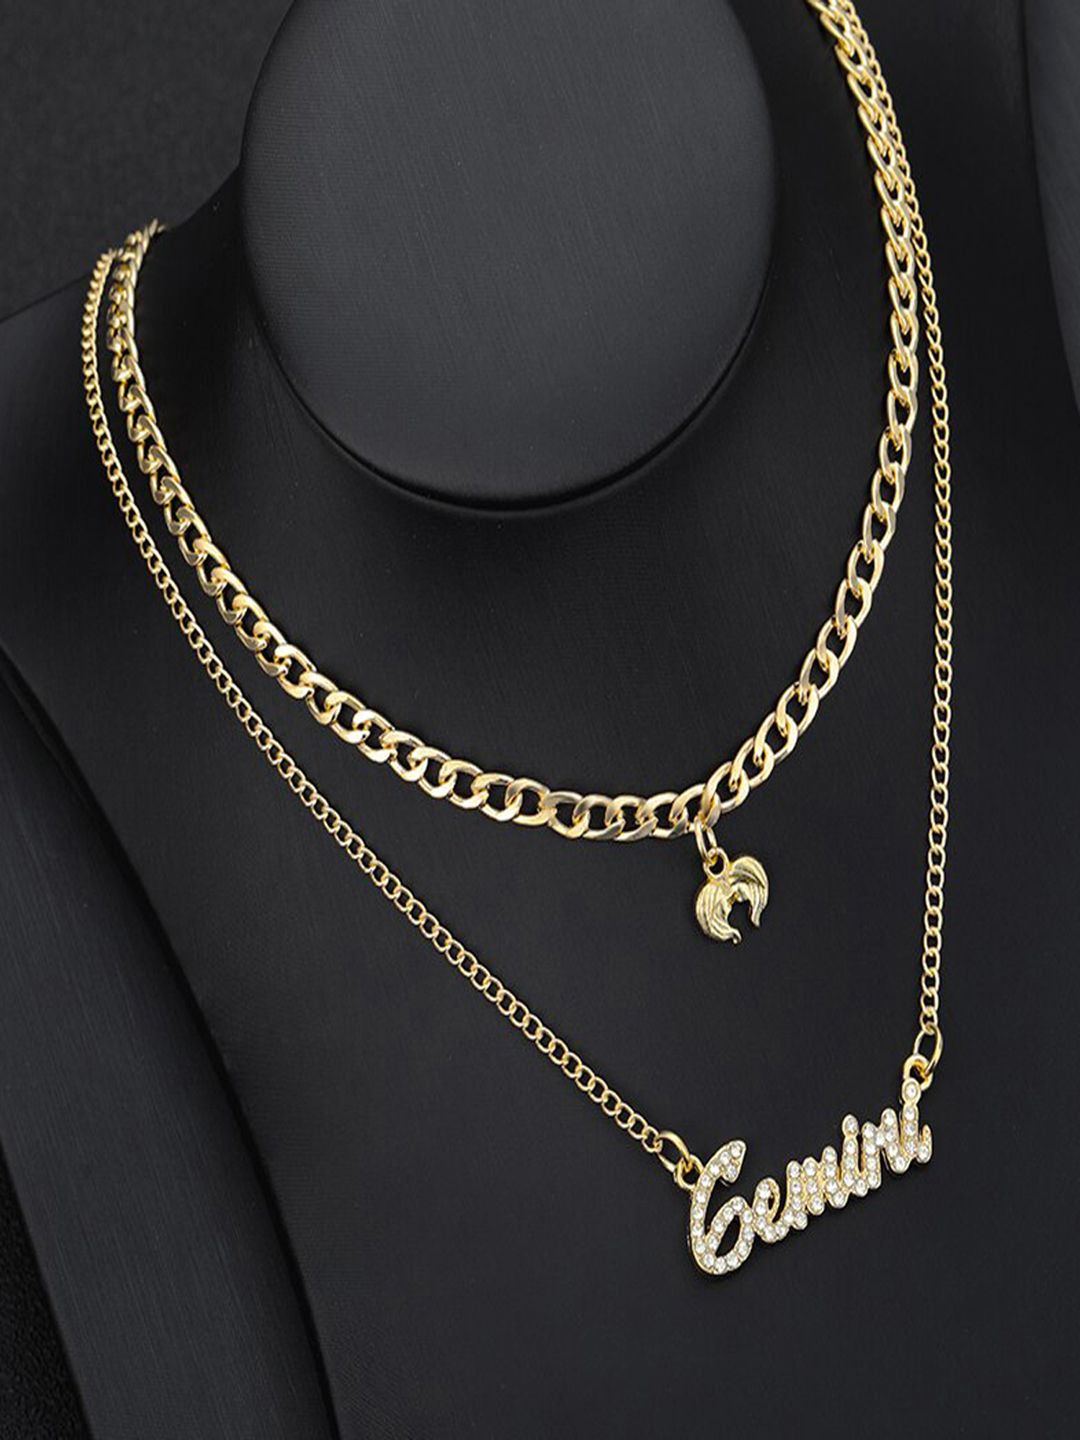 Jewels Galaxy Gold-Plated Gemini Zodiac Stone-Studded Layered Necklace Price in India